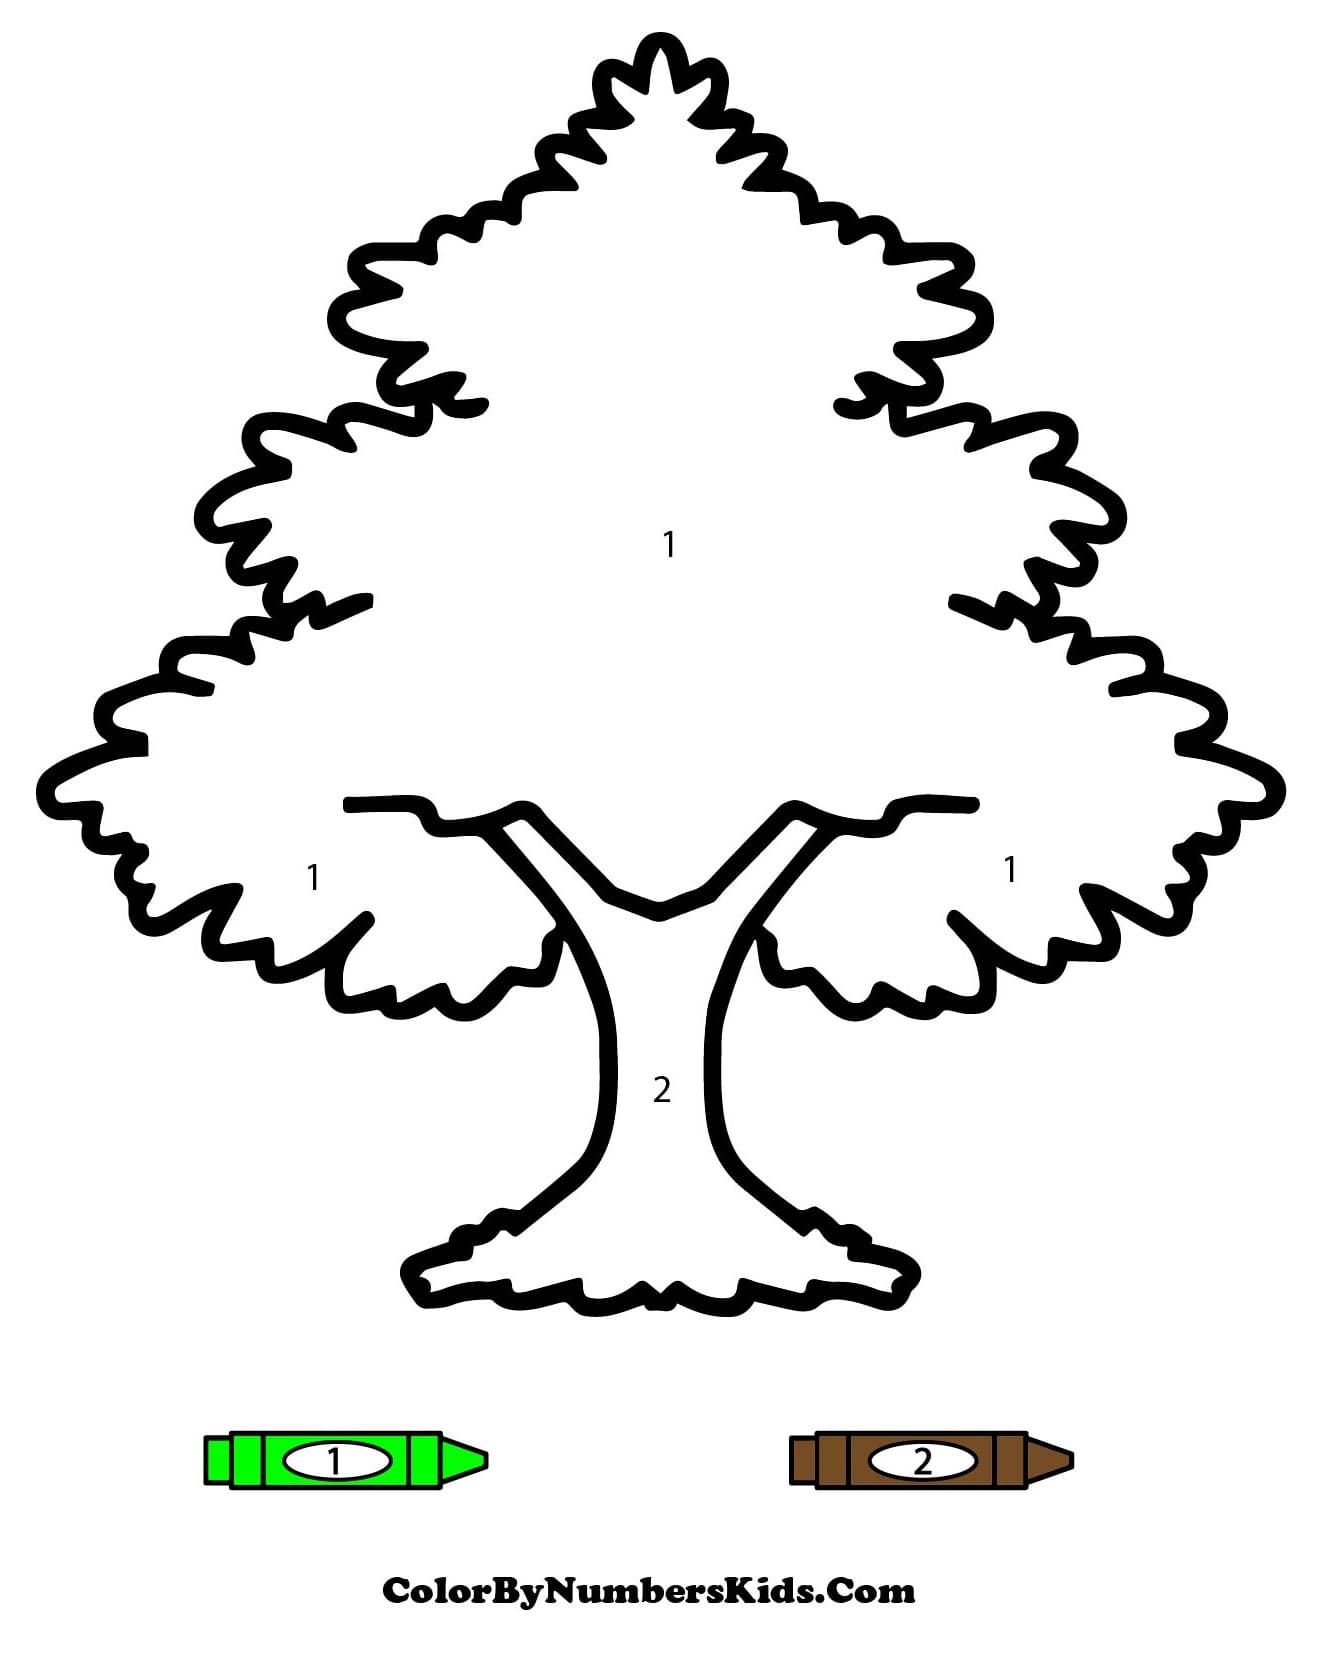 Normal Tree Color By Number